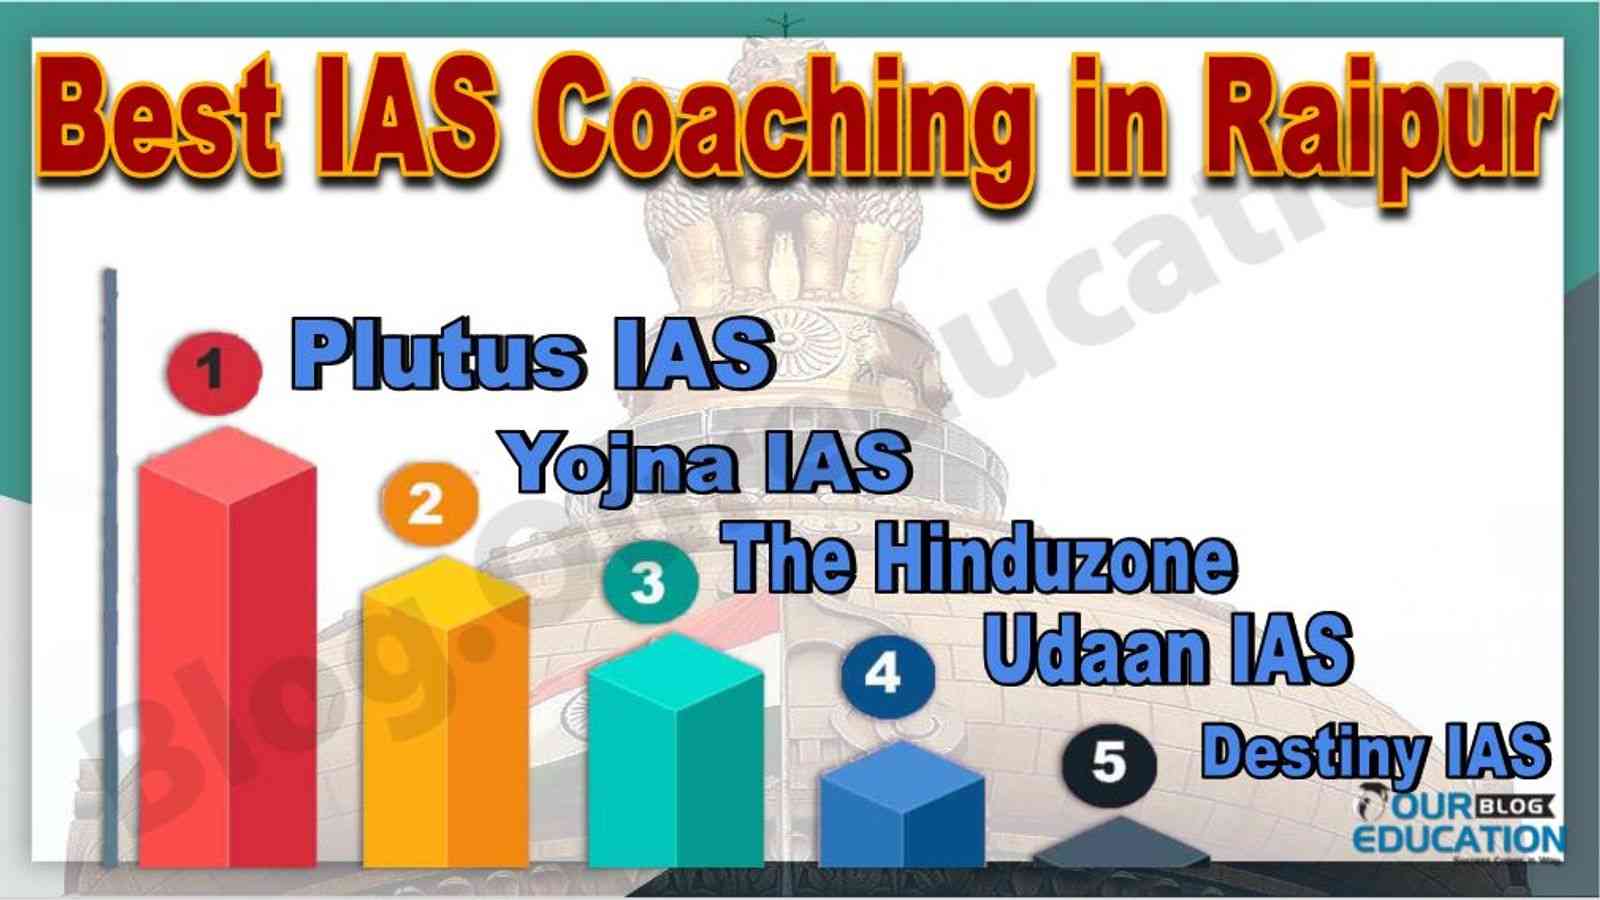 Top 10 IAS Coaching Institutes in Raipur - UPSC Toppers Strategy